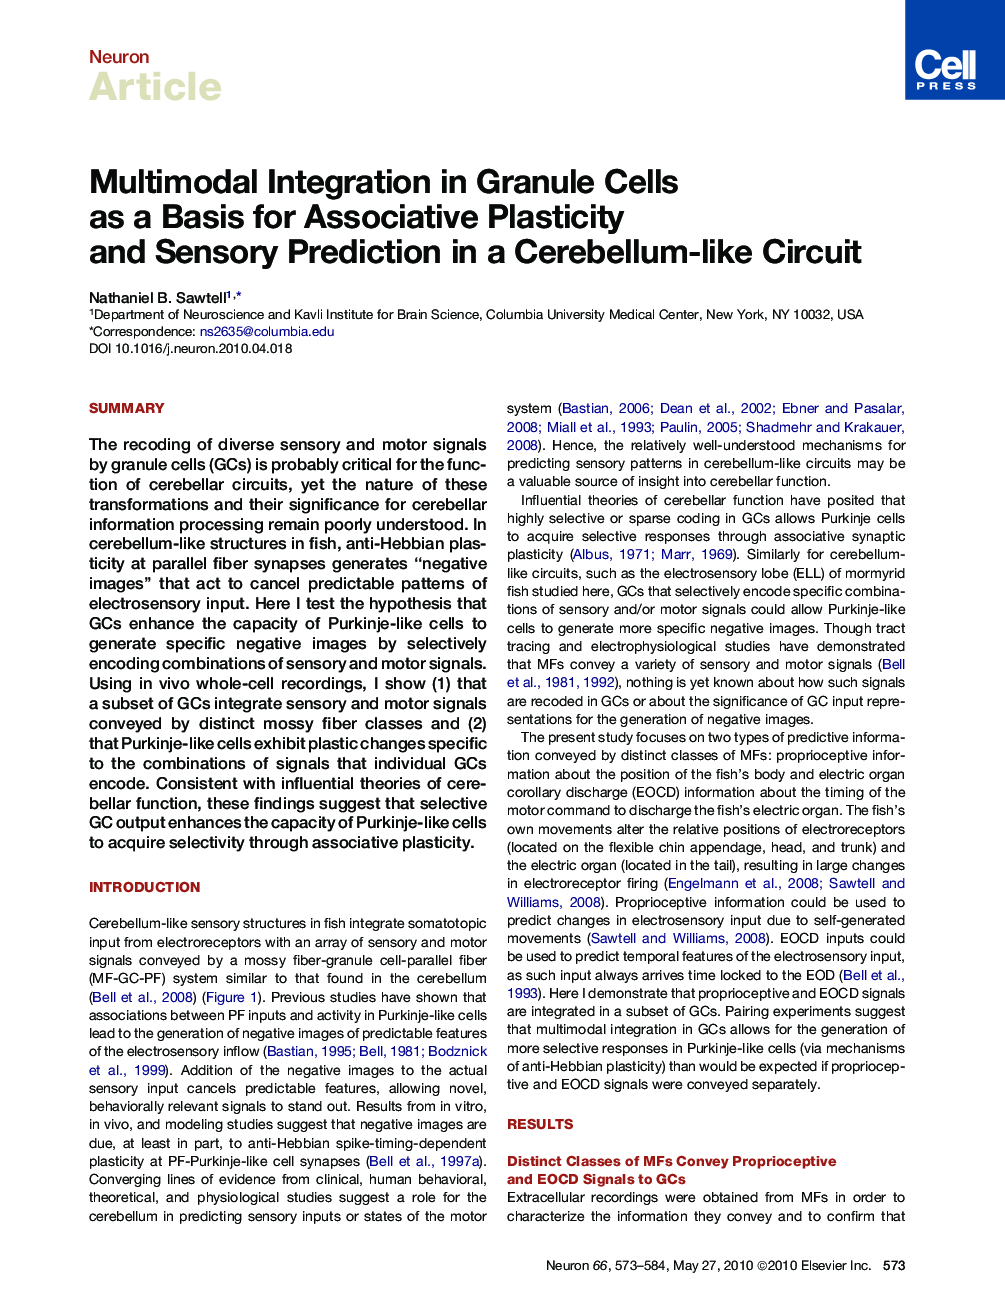 Multimodal Integration in Granule Cells as a Basis for Associative Plasticity and Sensory Prediction in a Cerebellum-like Circuit